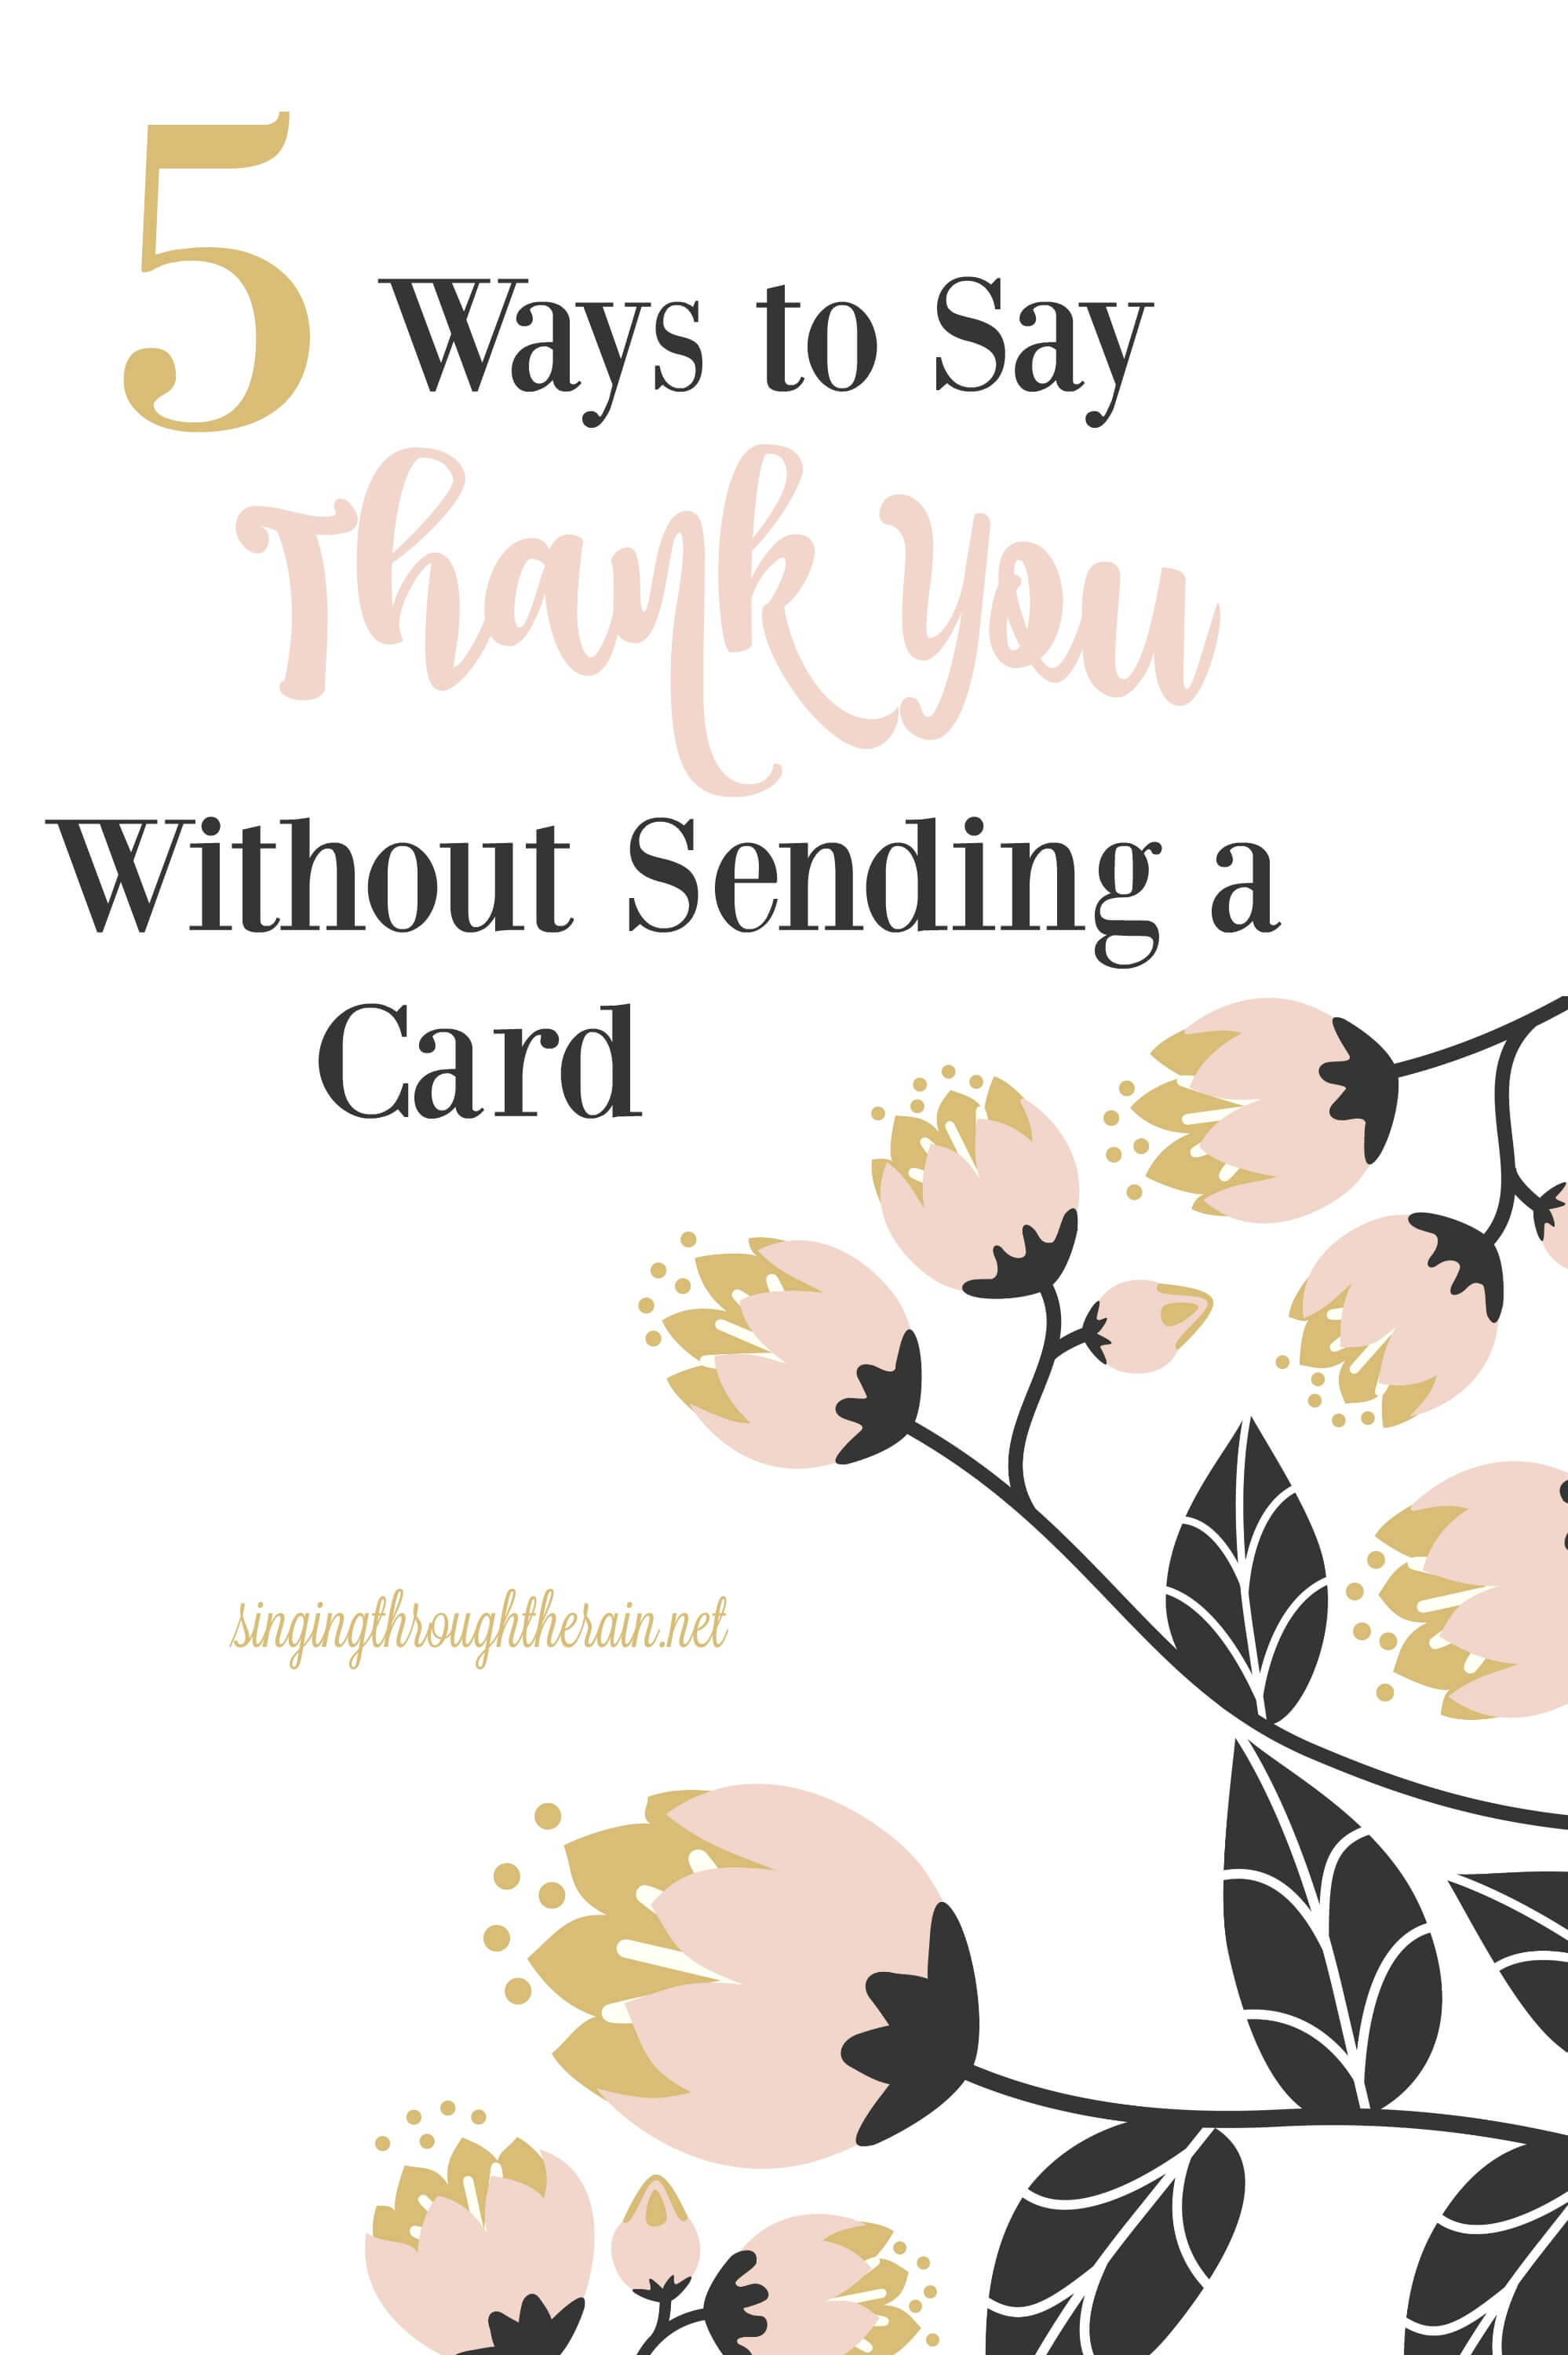 5 Ways to Say Thank You Without Sending a Card